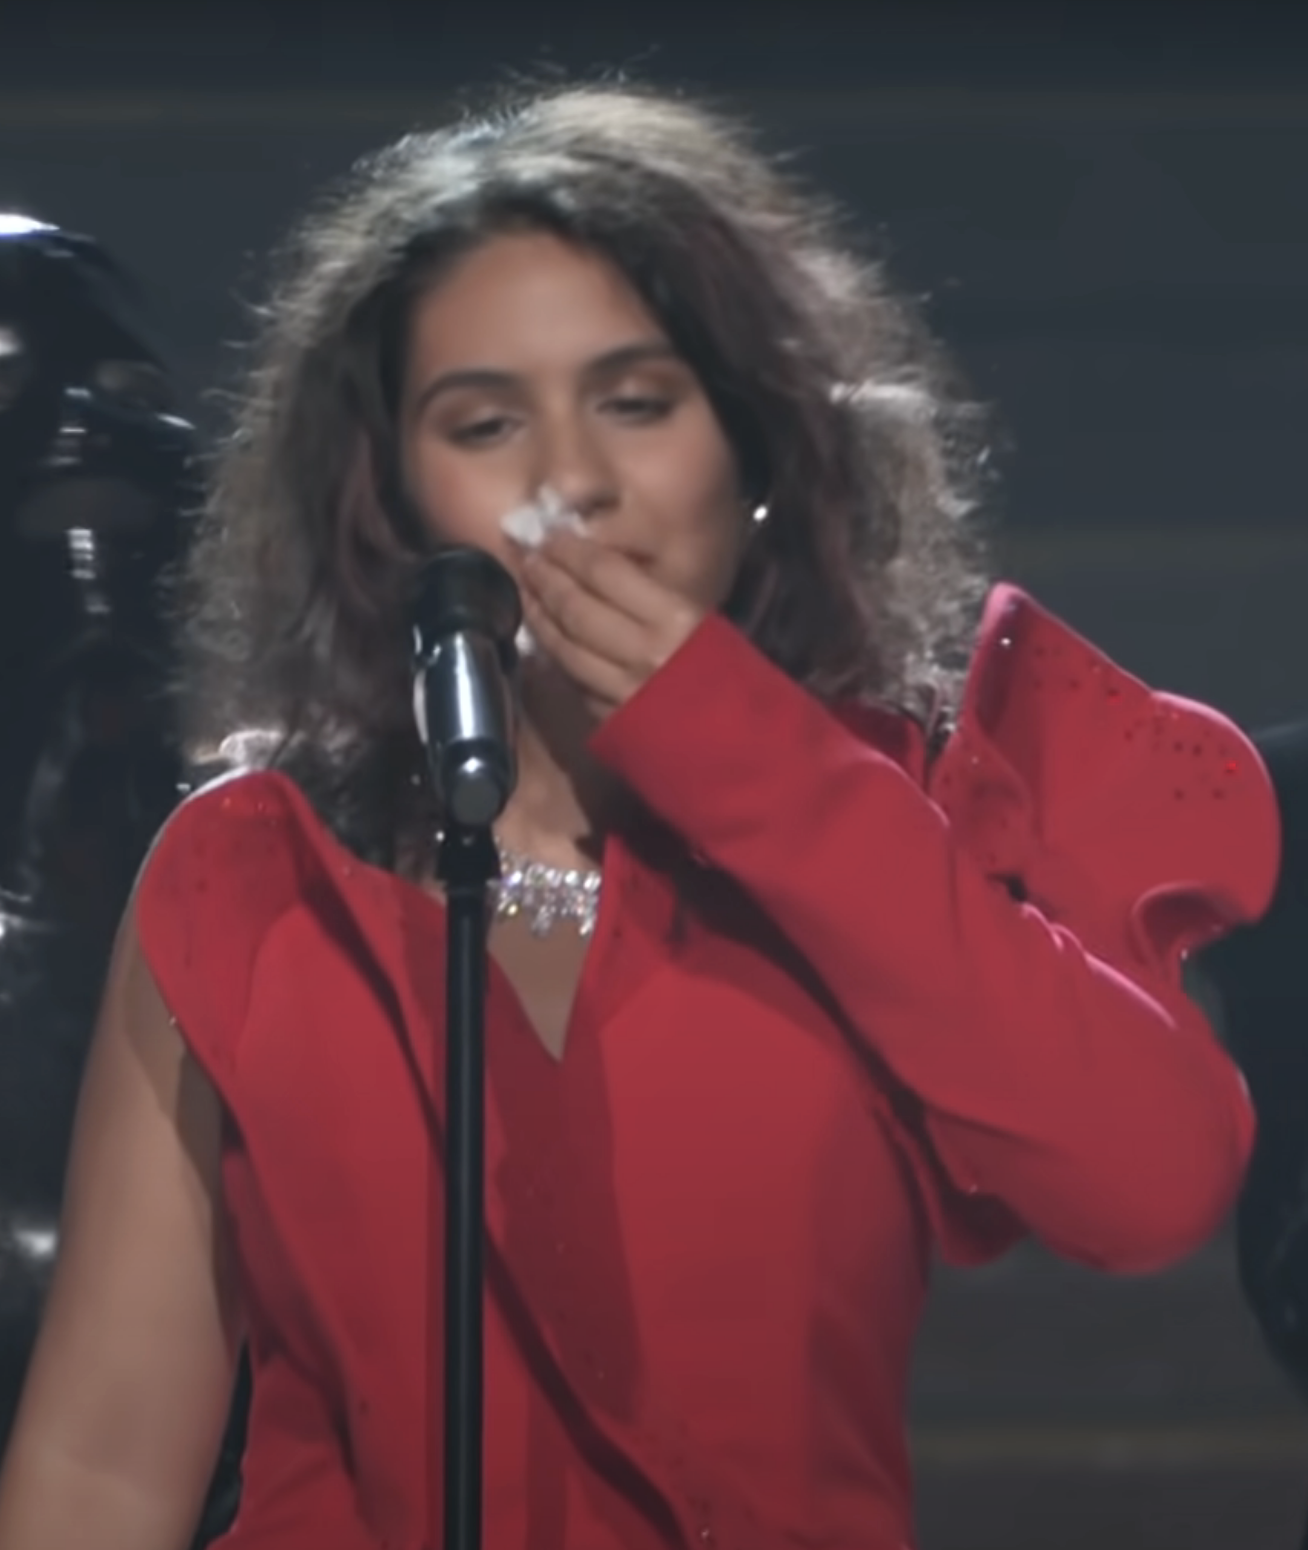 Alessia at a microphone wiping her makeup off with a tissue